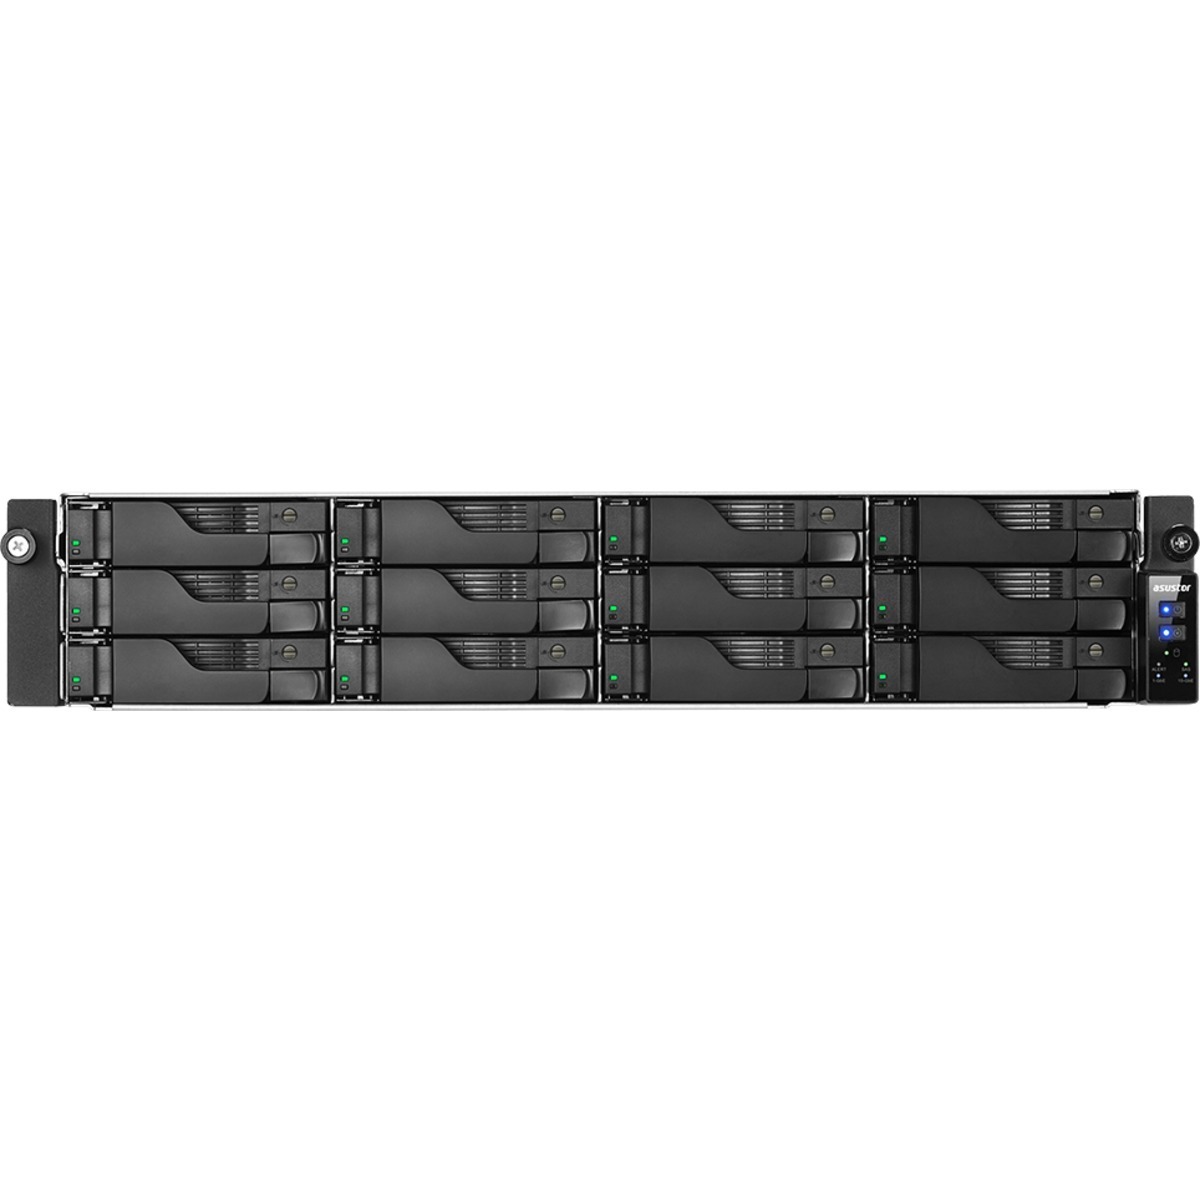 buy $6648 ASUSTOR AS7112RDX Lockerstor 12R Pro 96tb RackMount NAS - Network Attached Storage Device 12x8000gb Toshiba Enterprise Capacity MG08ADA800E 3.5 7200rpm SATA 6Gb/s HDD ENTERPRISE Class Drives Installed - Burn-In Tested - ON SALE - nas headquarters buy network attached storage server device das new raid-5 free shipping usa christmas new year holiday sale AS7112RDX Lockerstor 12R Pro